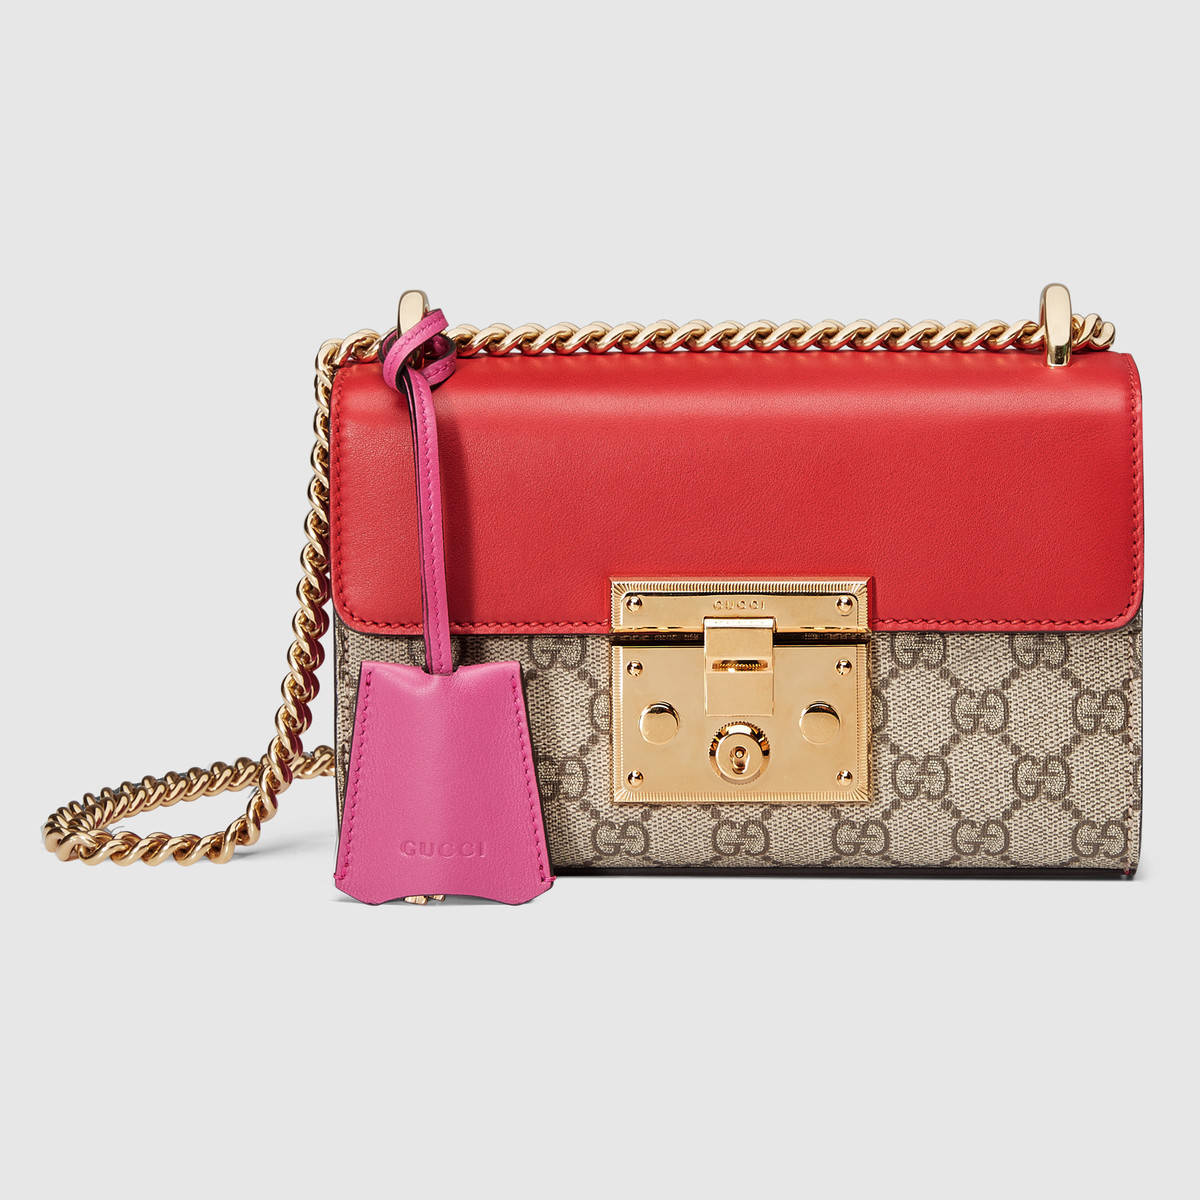 Gucci Padlock Small GG Supreme Canvas Shoulder Bag with Leather Top - LULUX